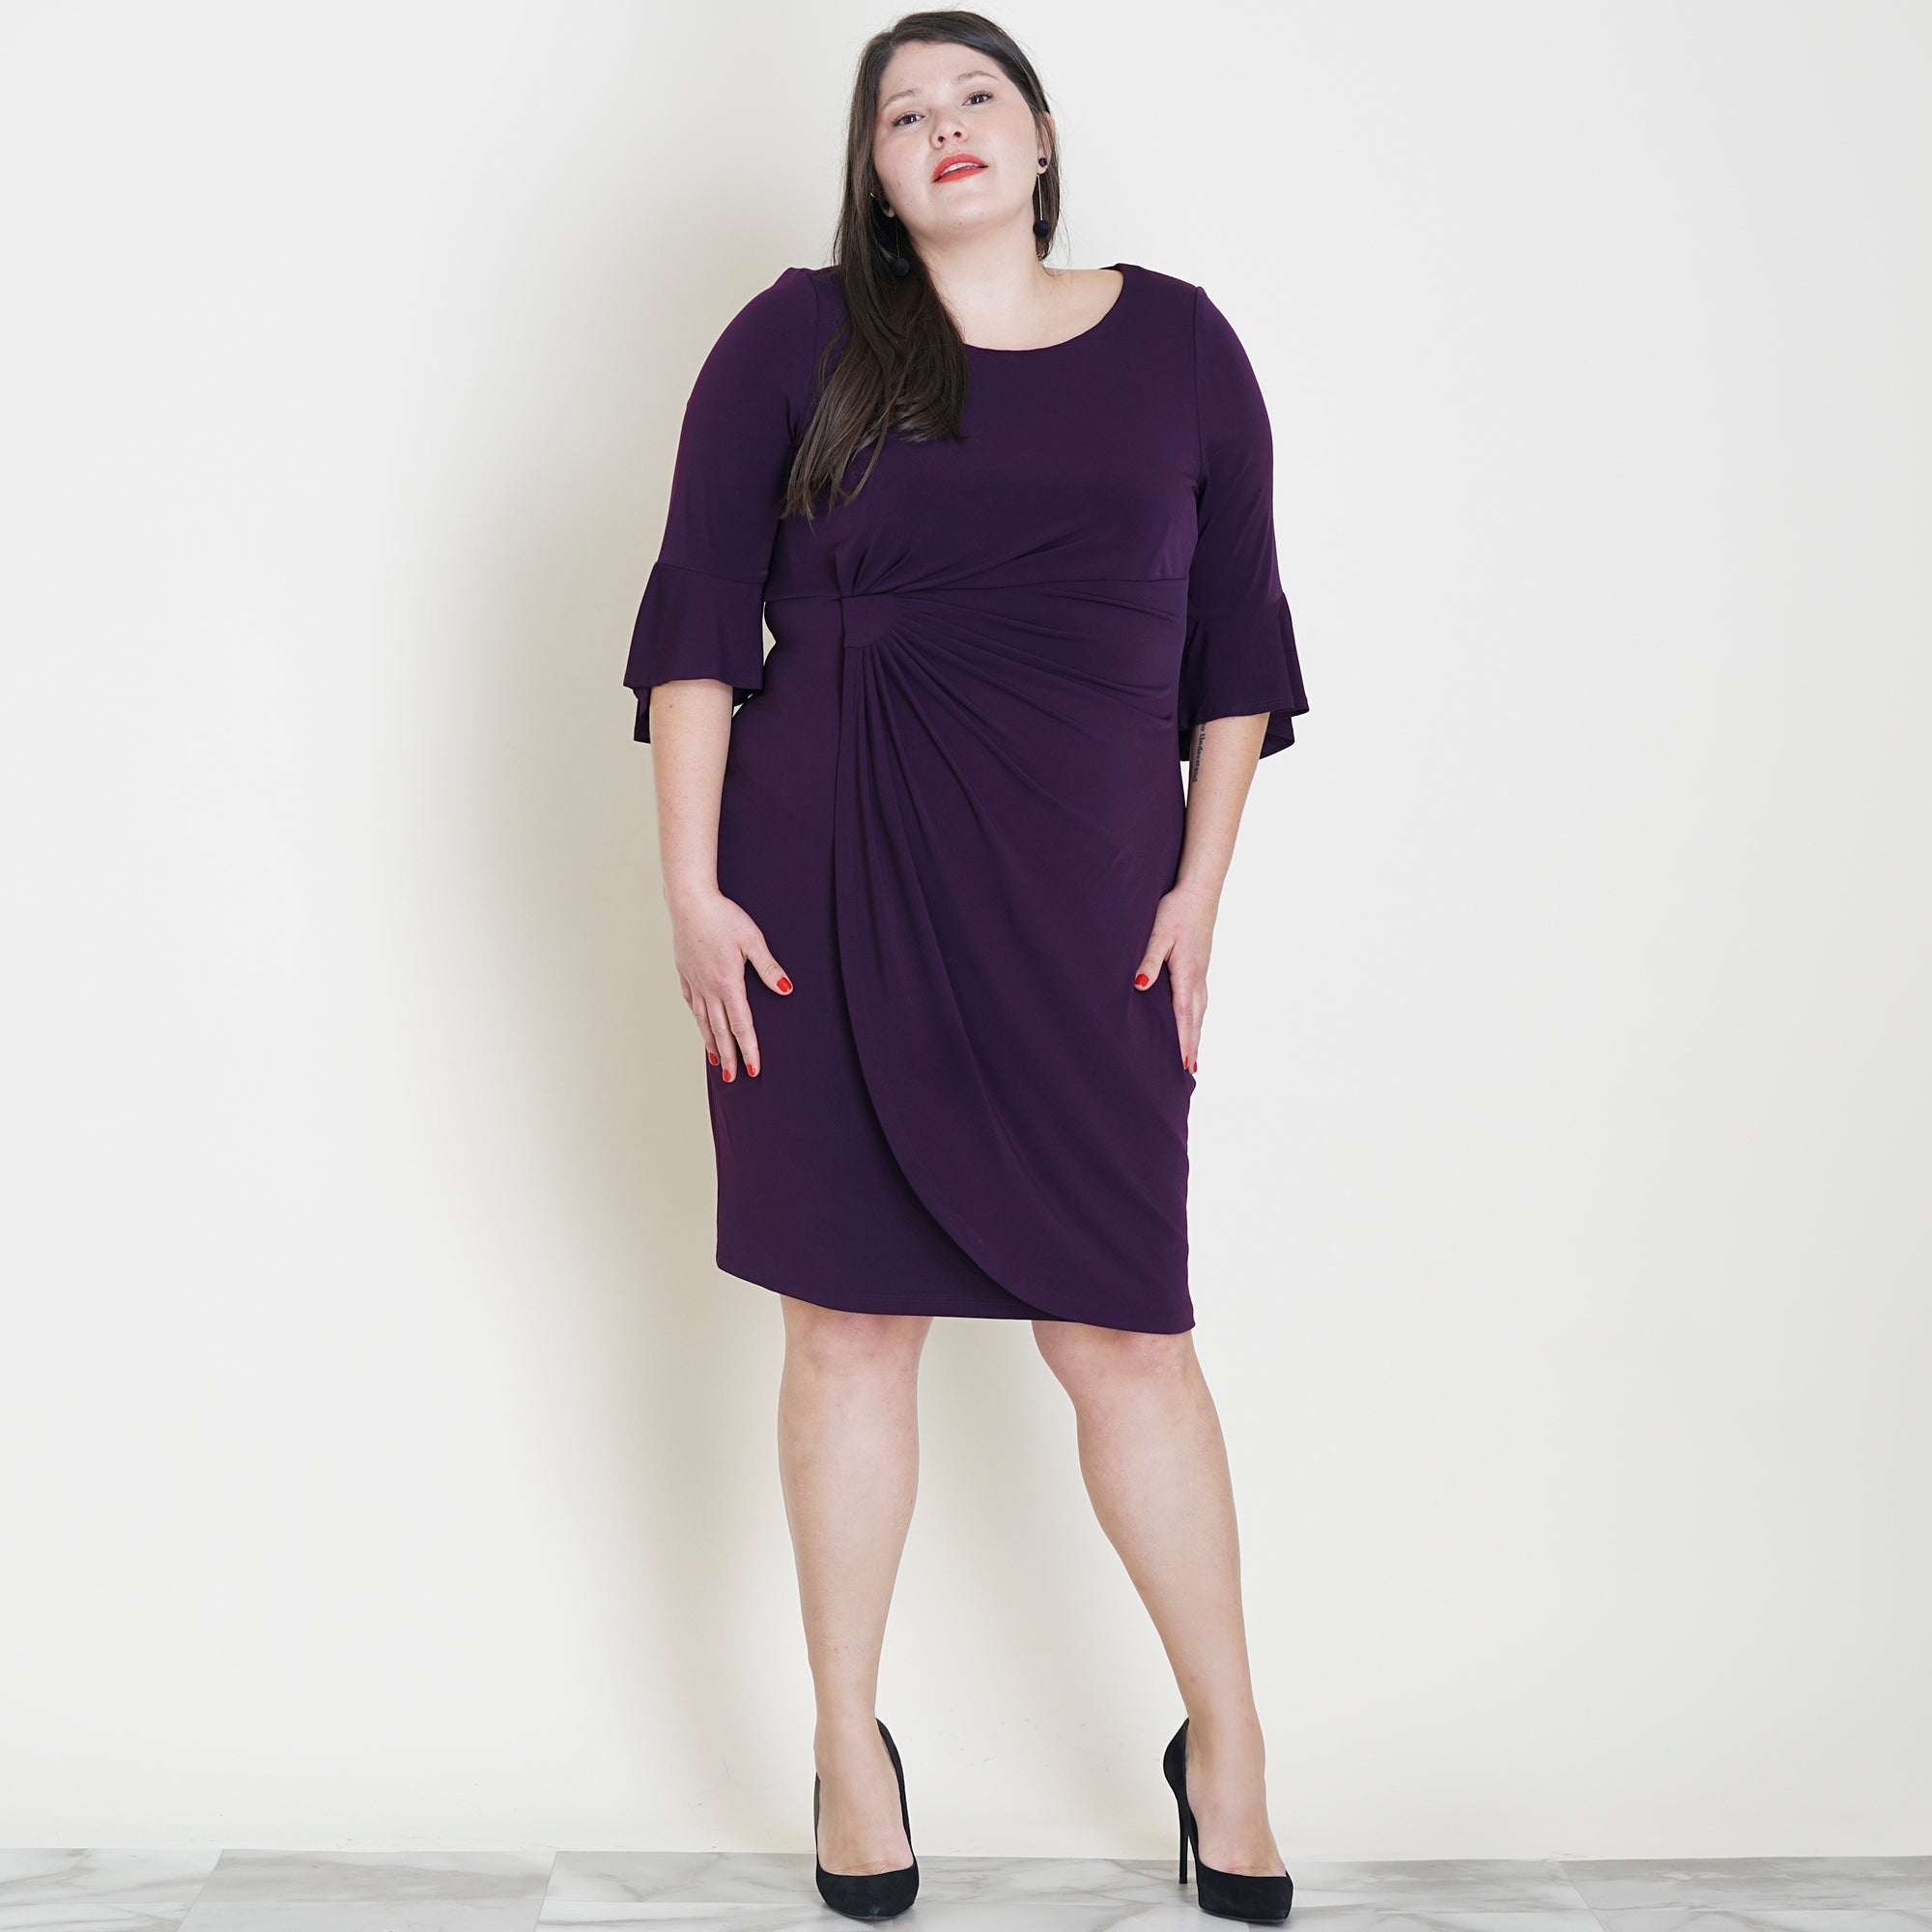 Woman posing wearing Aubergine Lisa 2.0 Aubergine Faux Wrap Dress from Connected Apparel